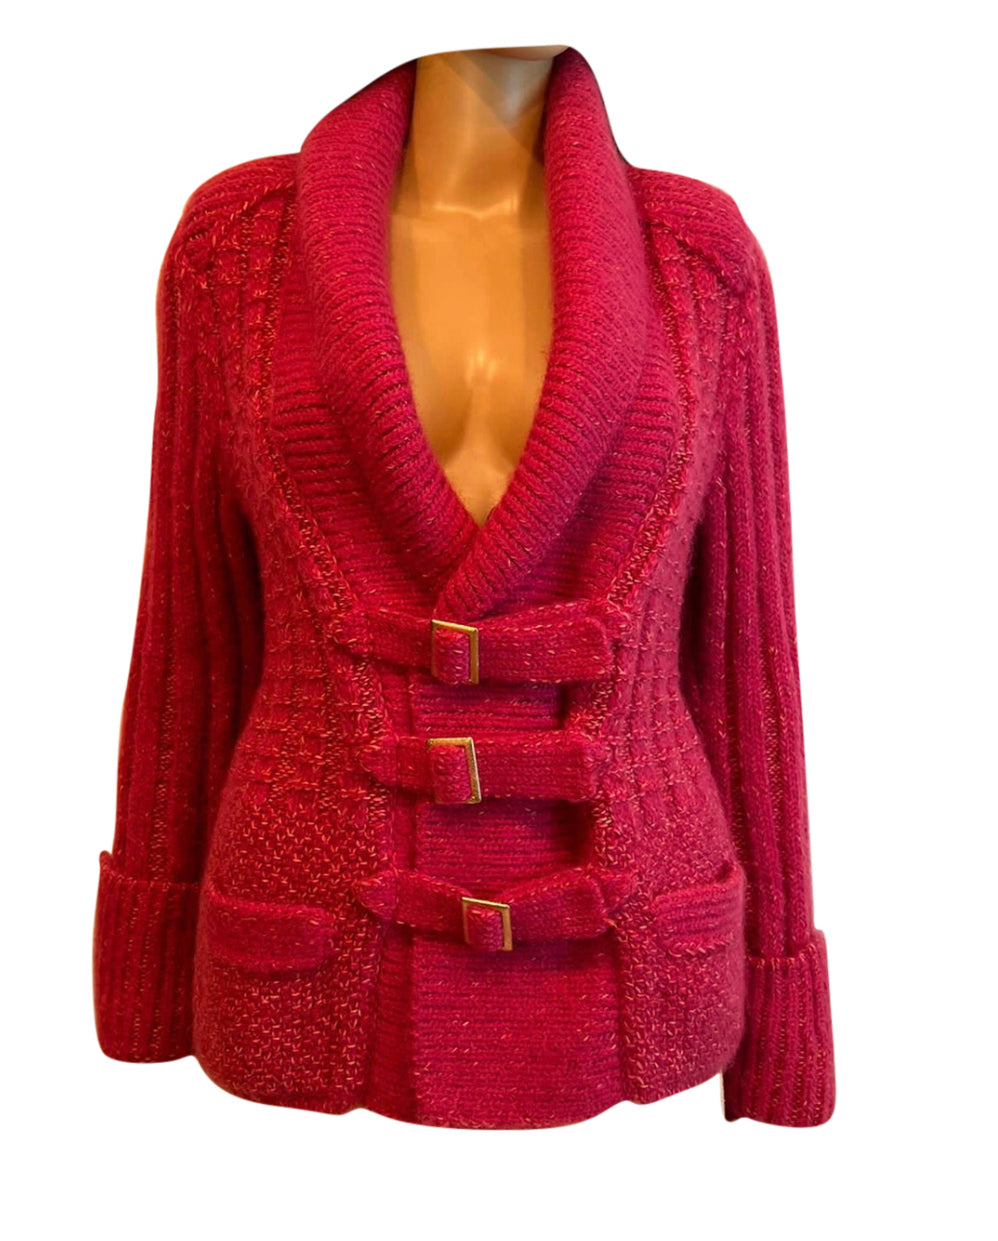 CHANEL A/W 2009 Shawl Collar Button Front Knit Cardigan Sweater